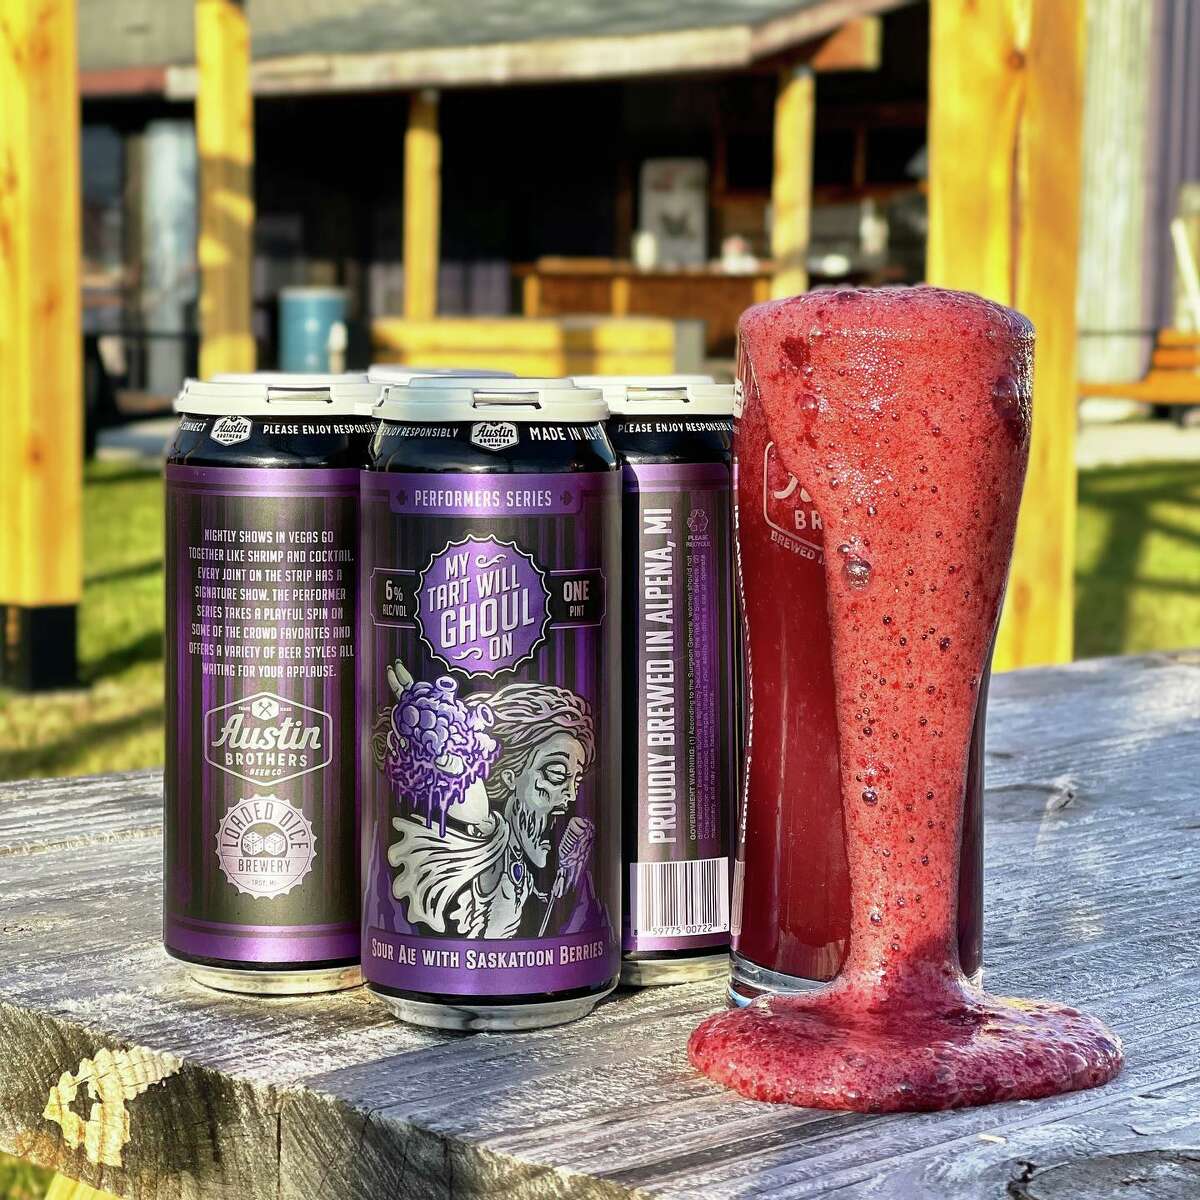 My Tart Will Ghoul On, is a fruited kettle sour featuring Saskatoon Berries, spawned from the wacky union of Austin Brothers Beer Co. in Alpena and Loaded Dice Brewery in Troy.